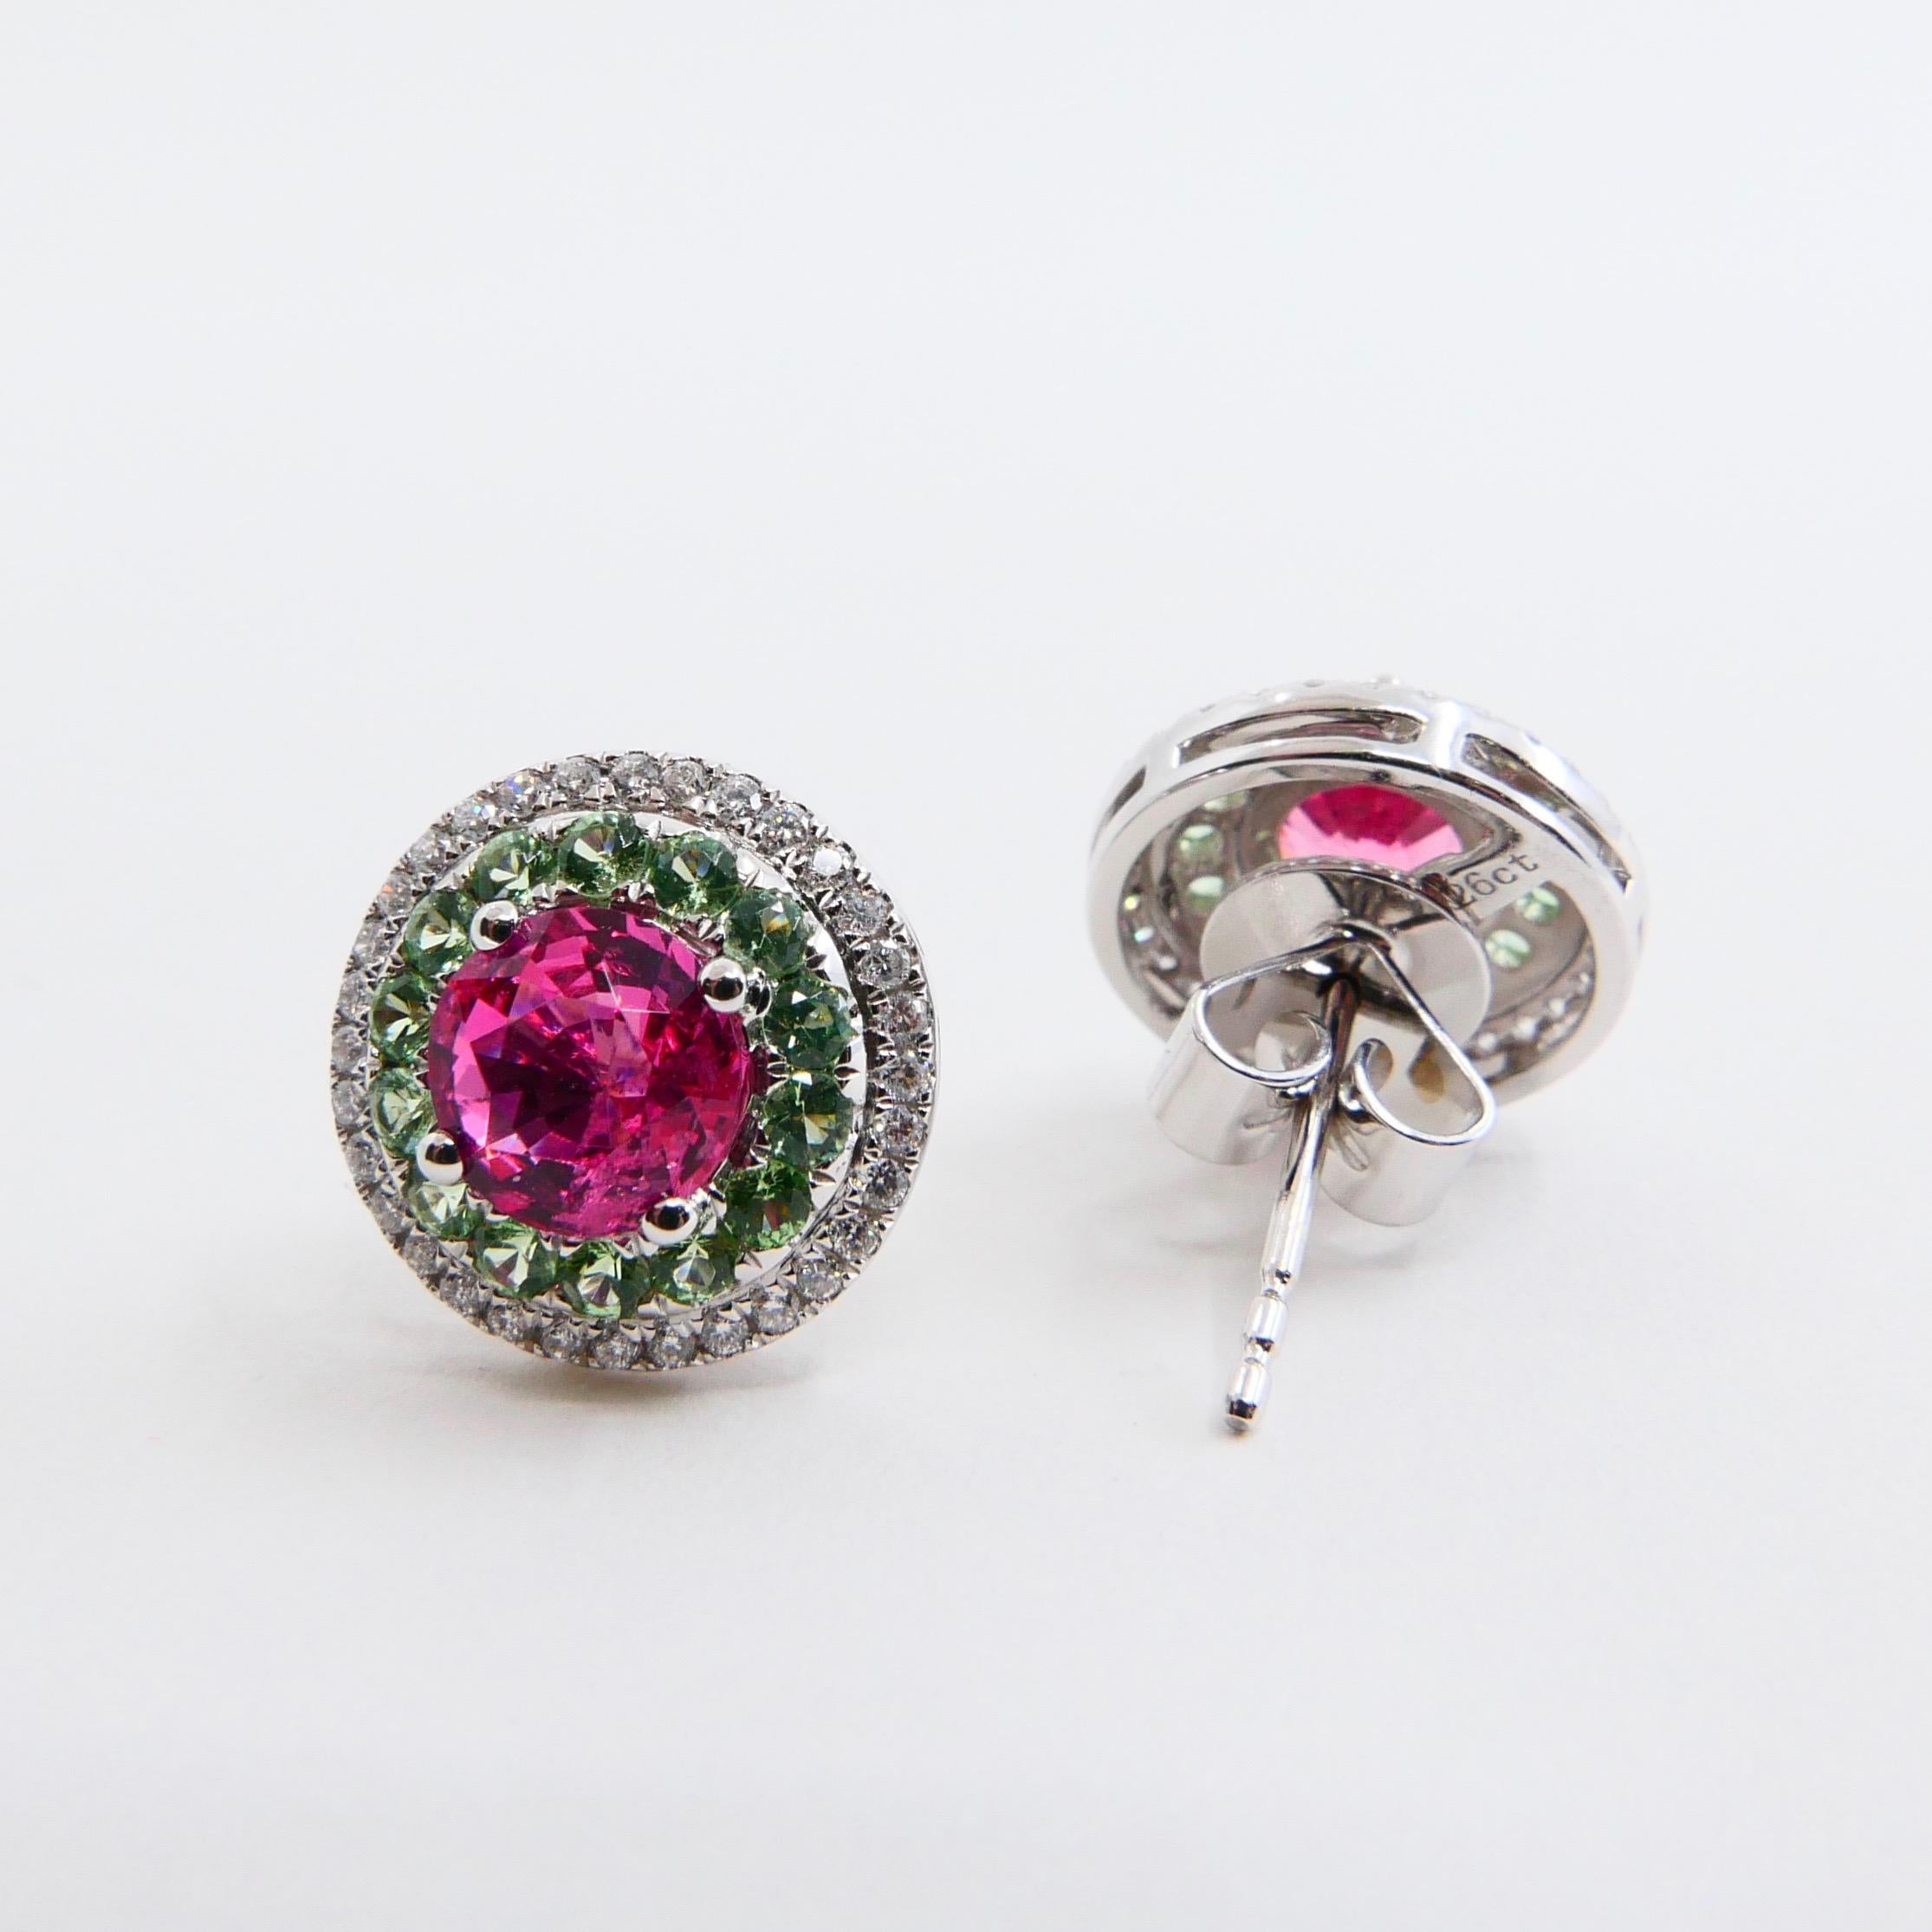 Natural 1.53 Carat Vivid Neon Pink Spinel Peridot and Diamond Earrings, 18k Gold 1